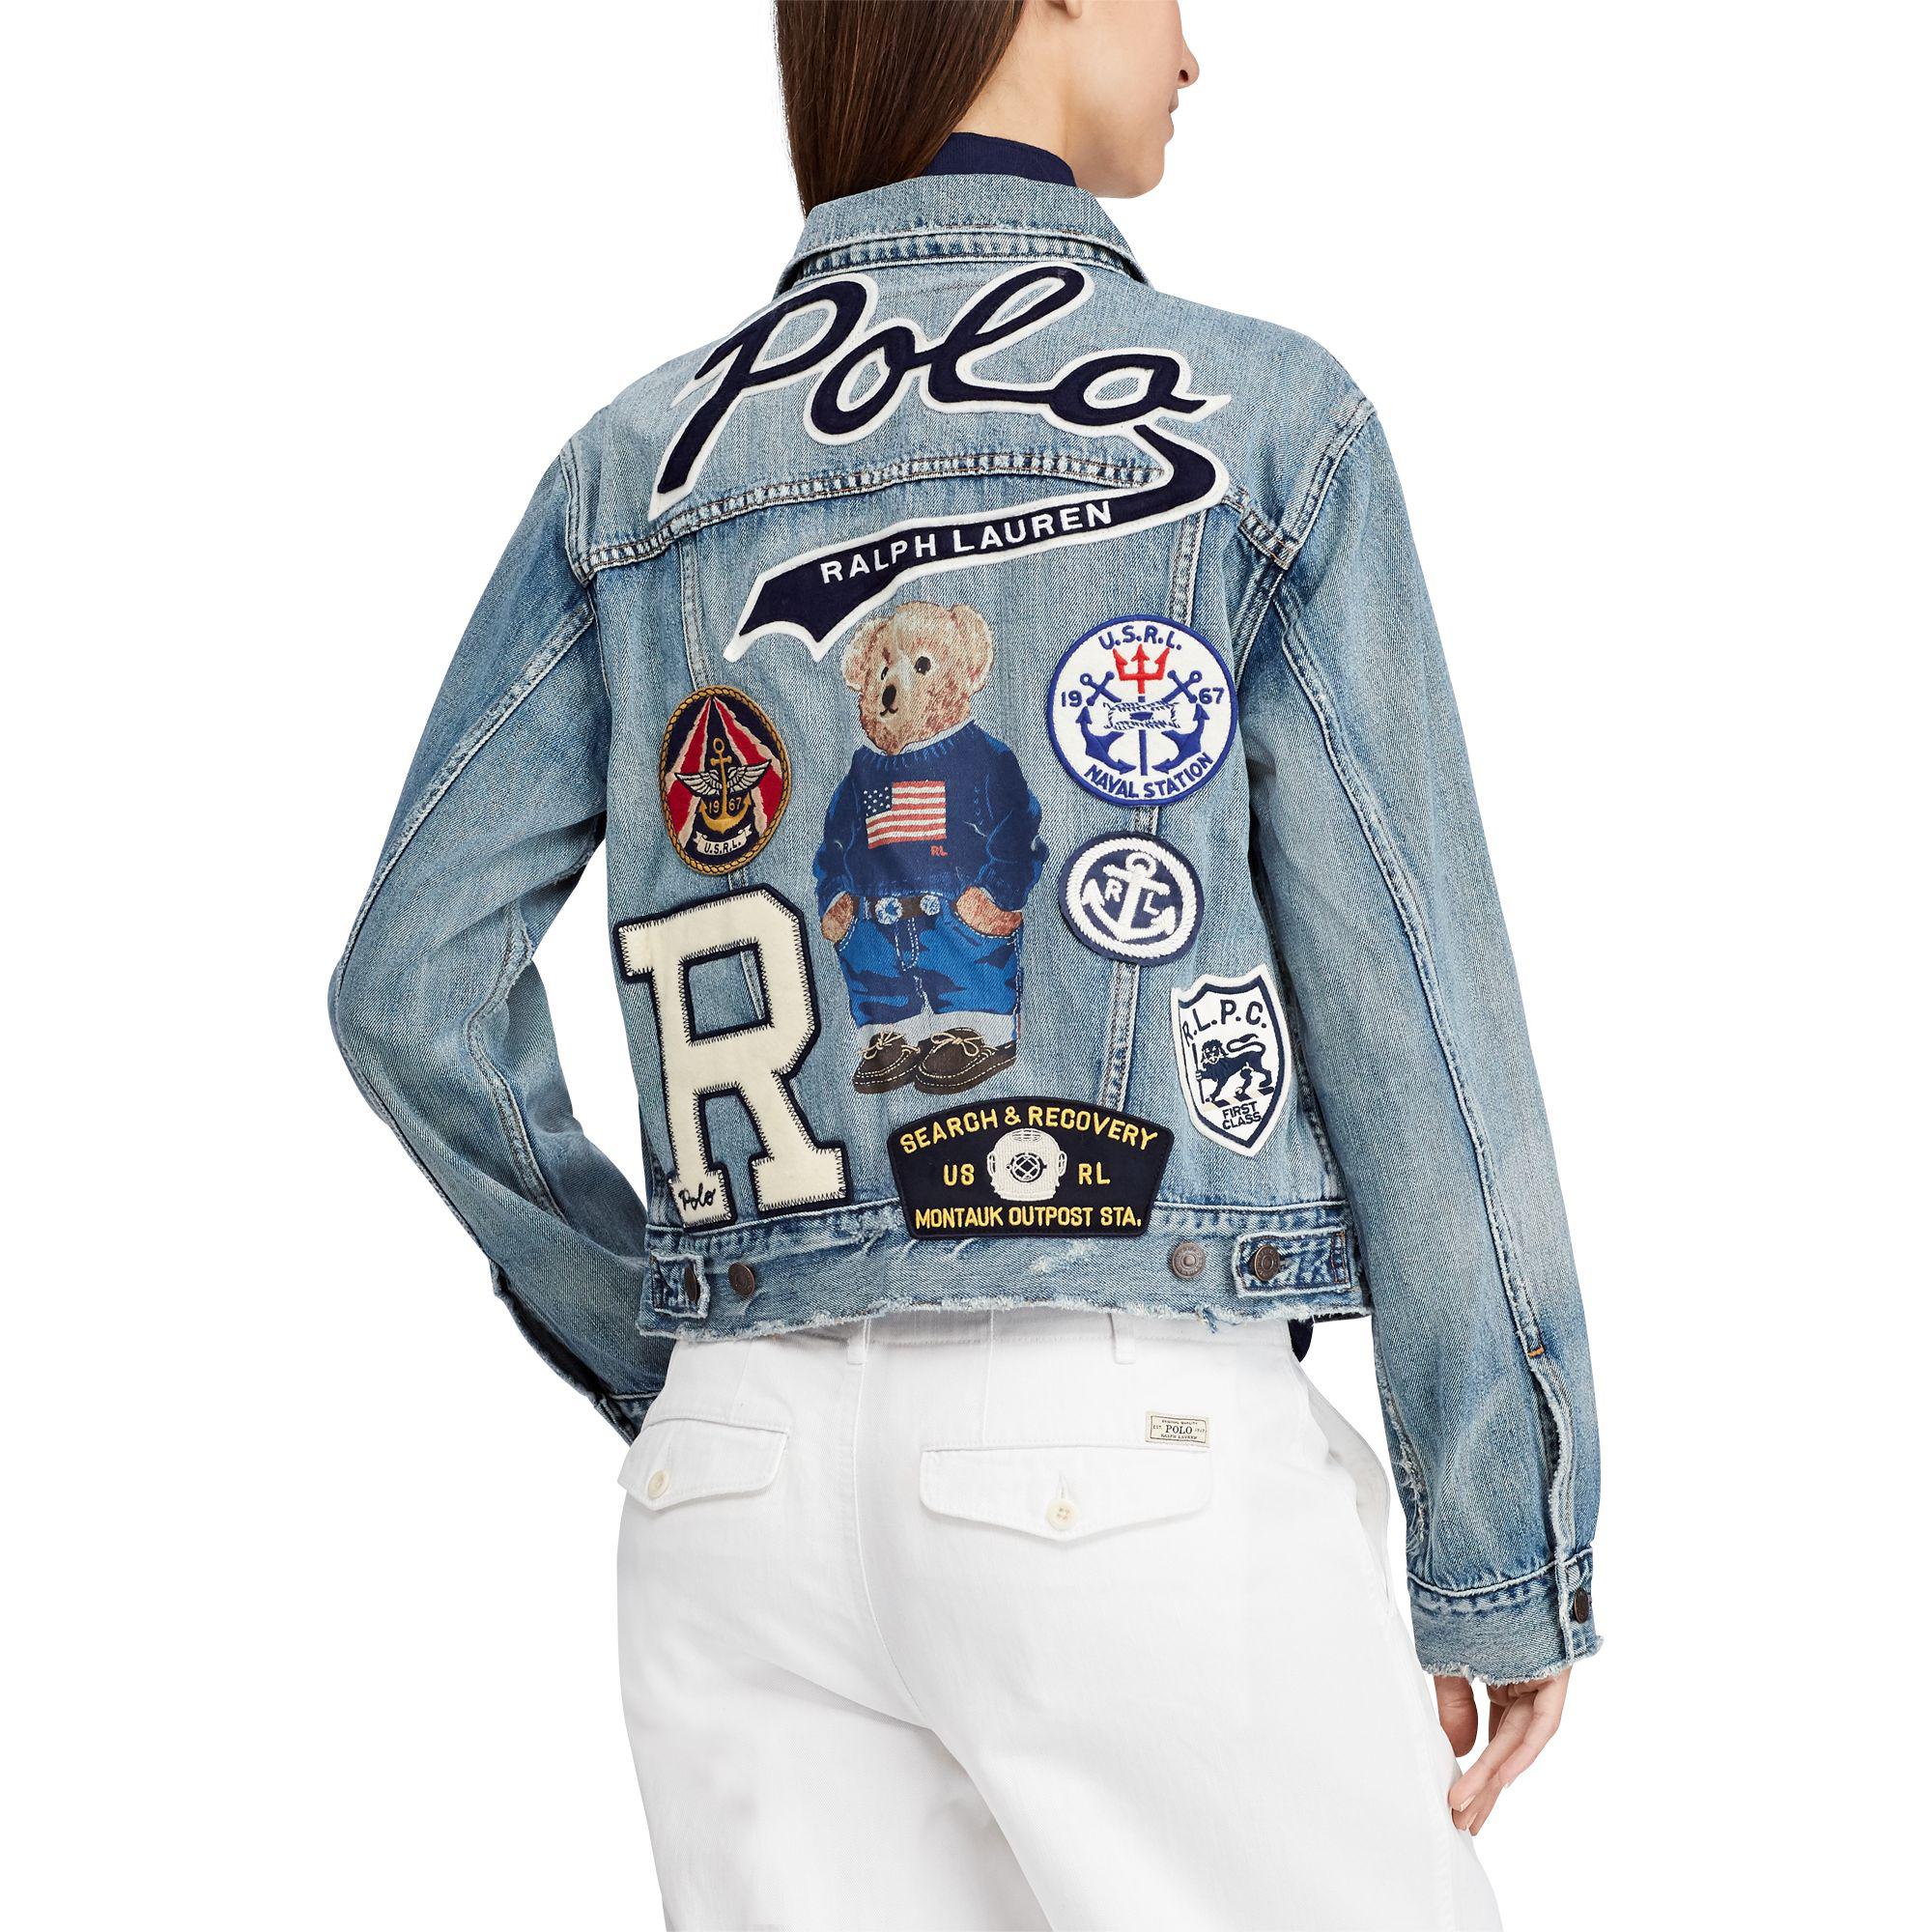 polo jean jacket with patches